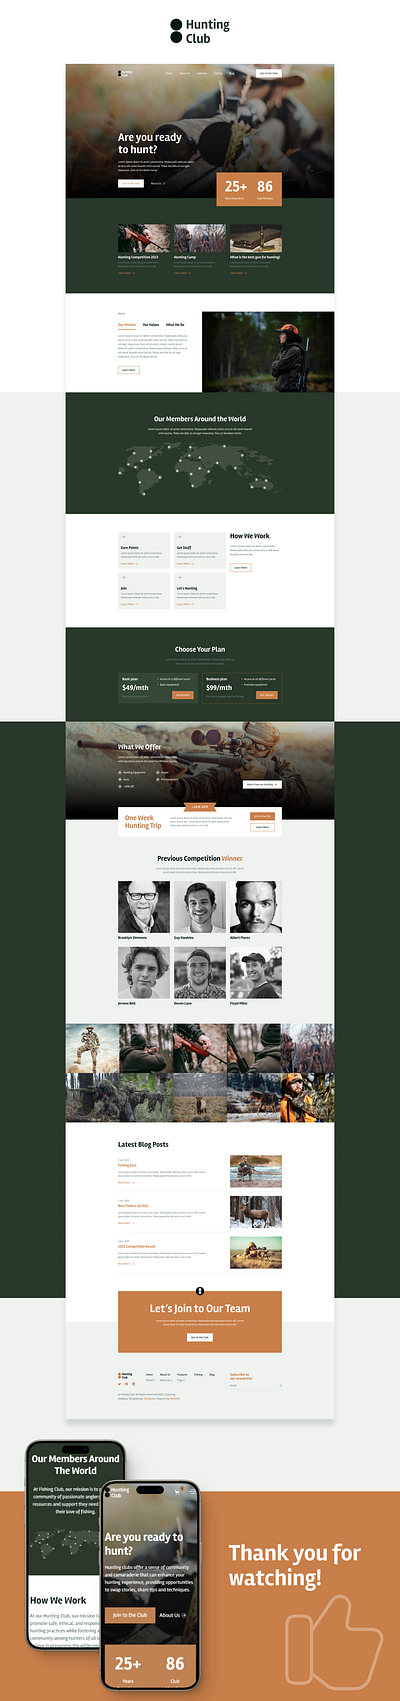 Fishing and Hunting Club fishing template hunting template professional design responsive design seo optimized template ui design user friendly design webdesign webdesign template webflow design webflow designers webflow template website design website template